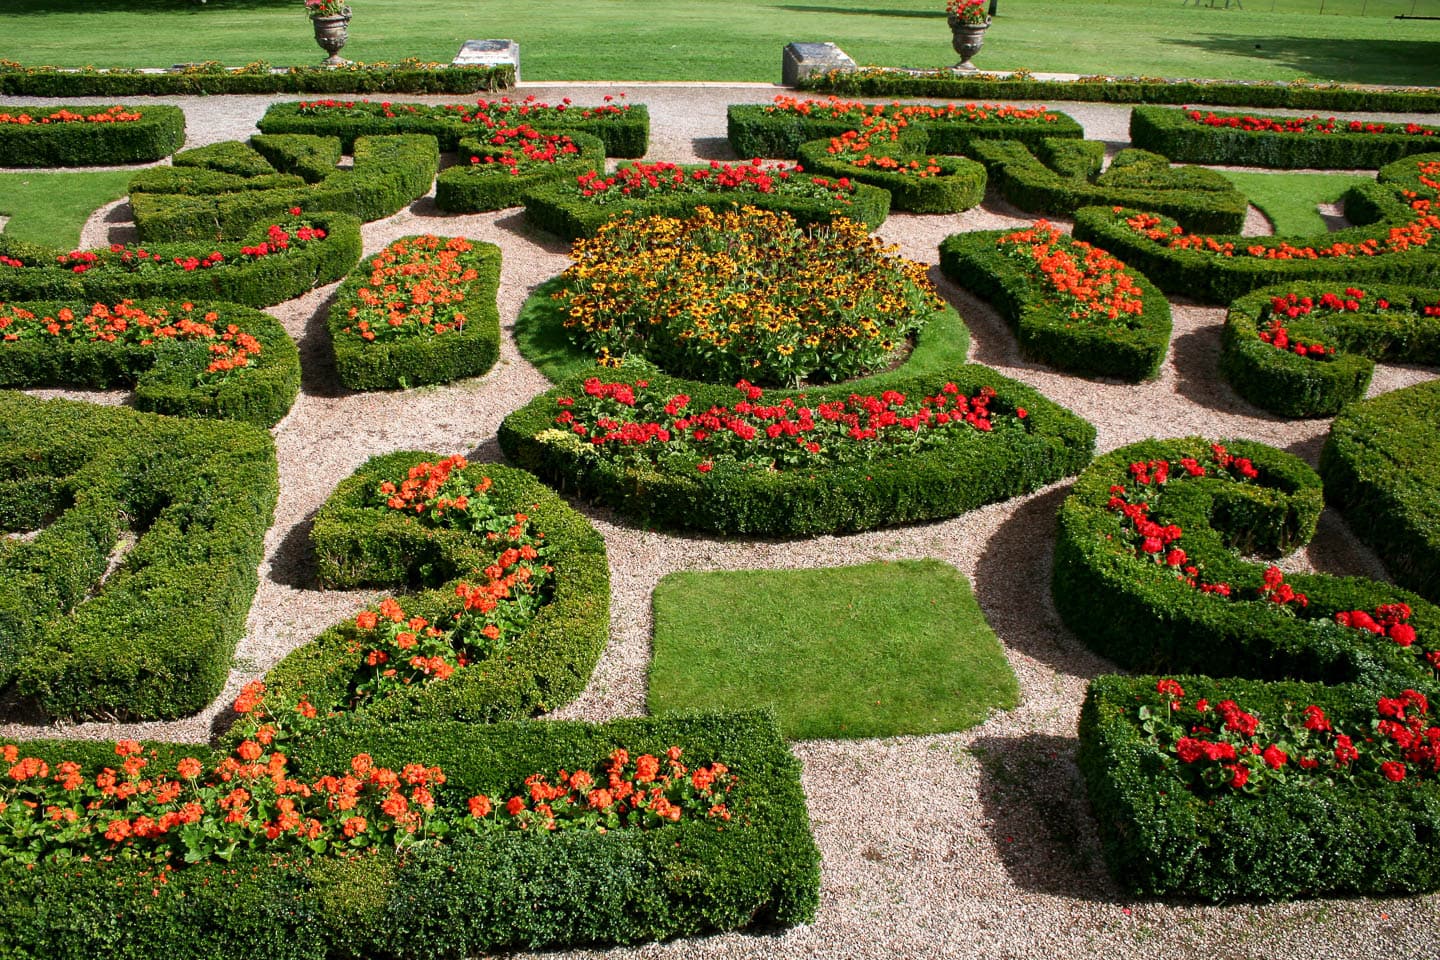 Circular garden beds edged in dwarf box hedges and filled with red flowers